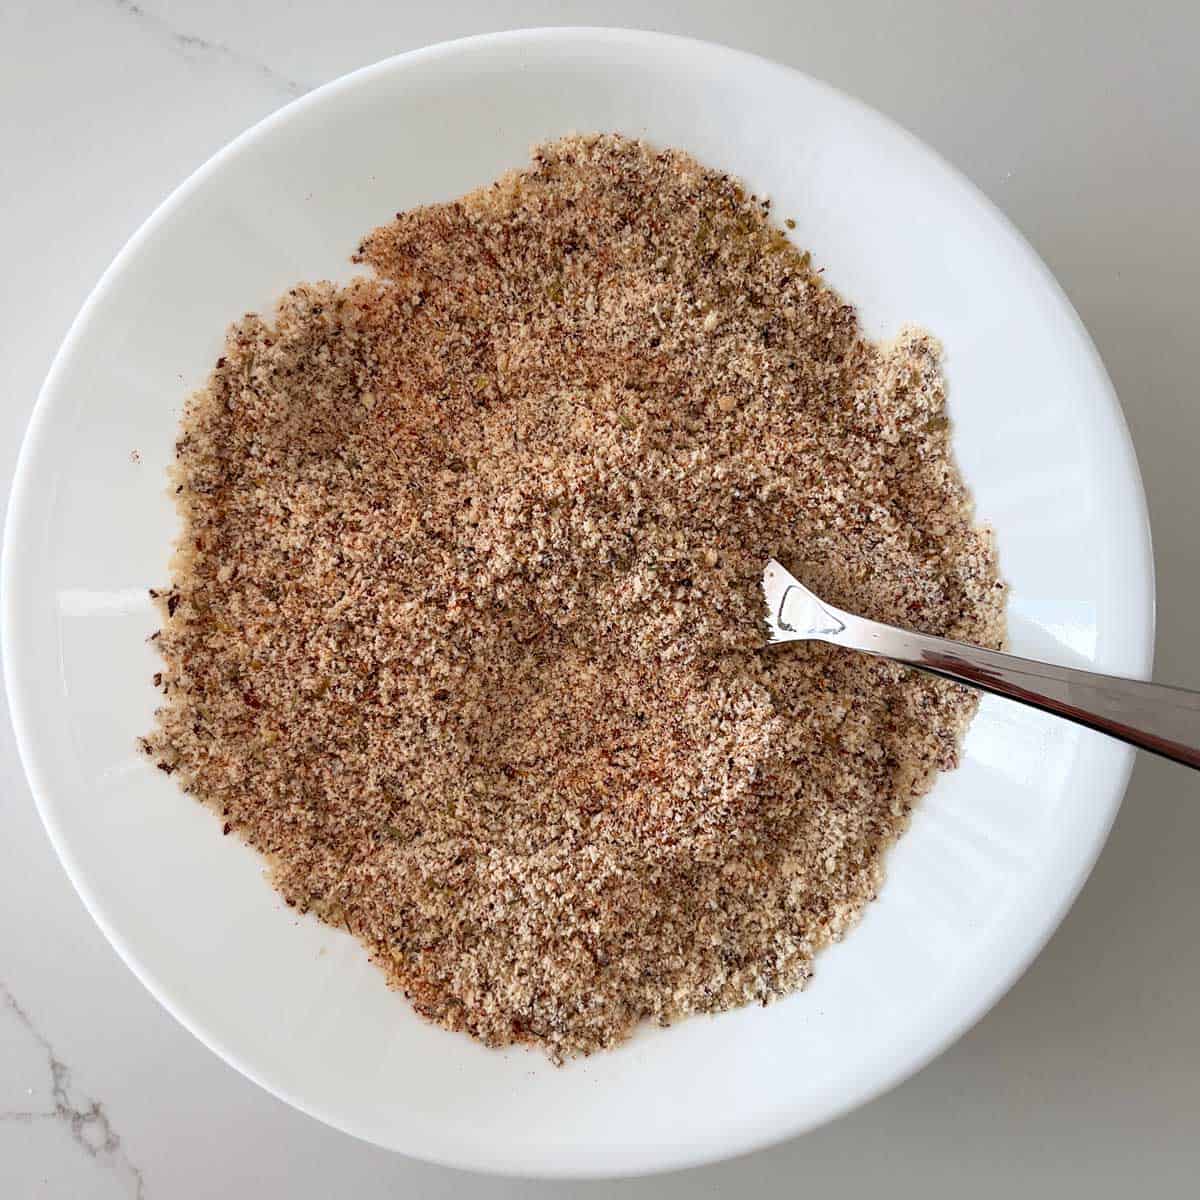 Almond meal and spices are mixed in a bowl.